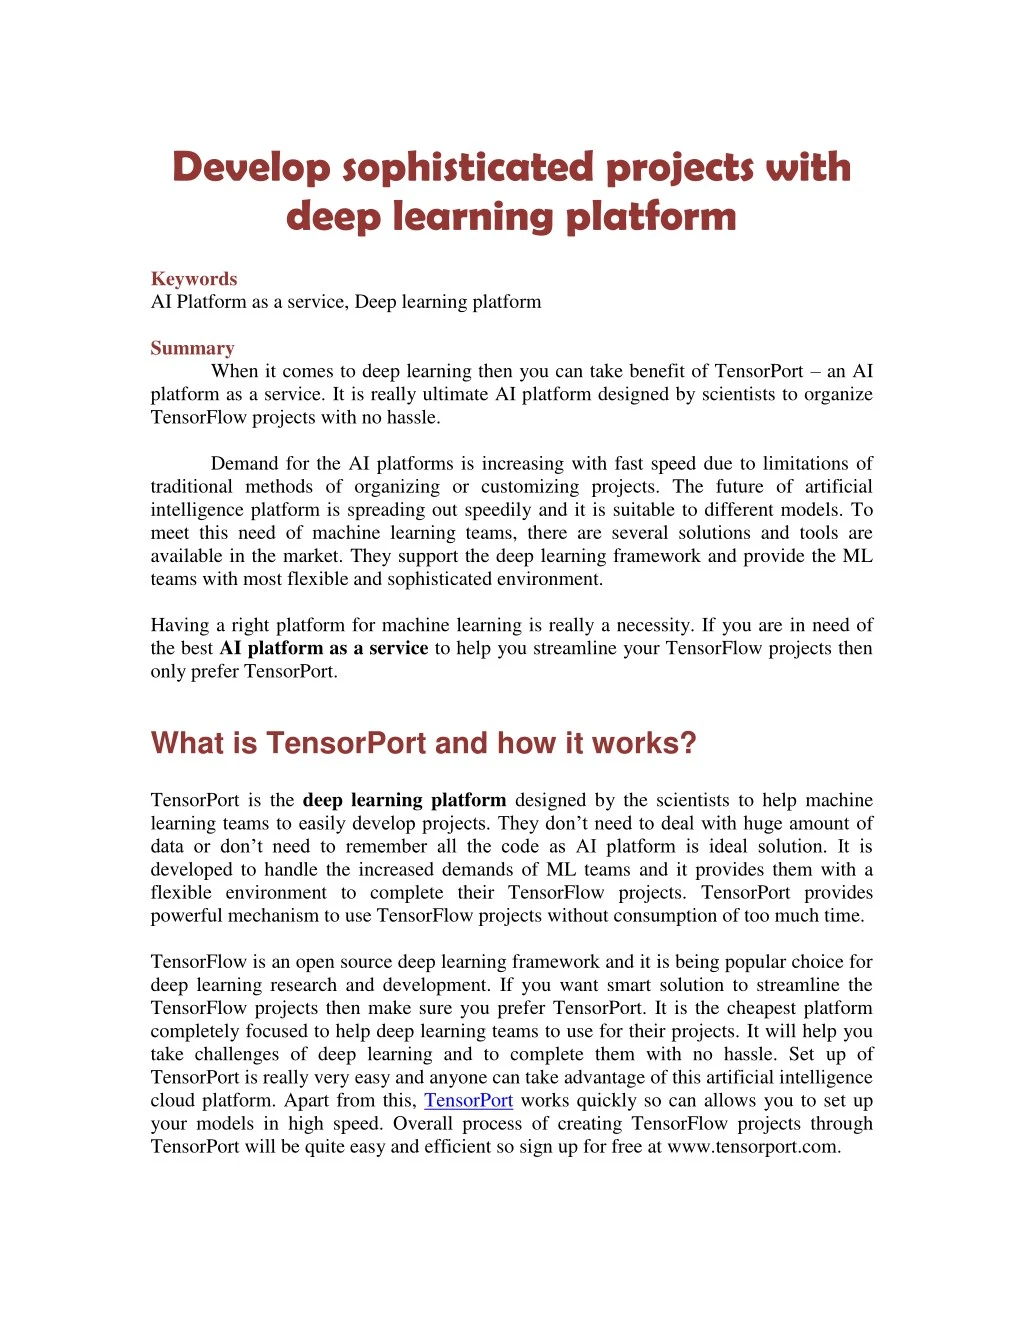 develop sophisticated projects with deep learning